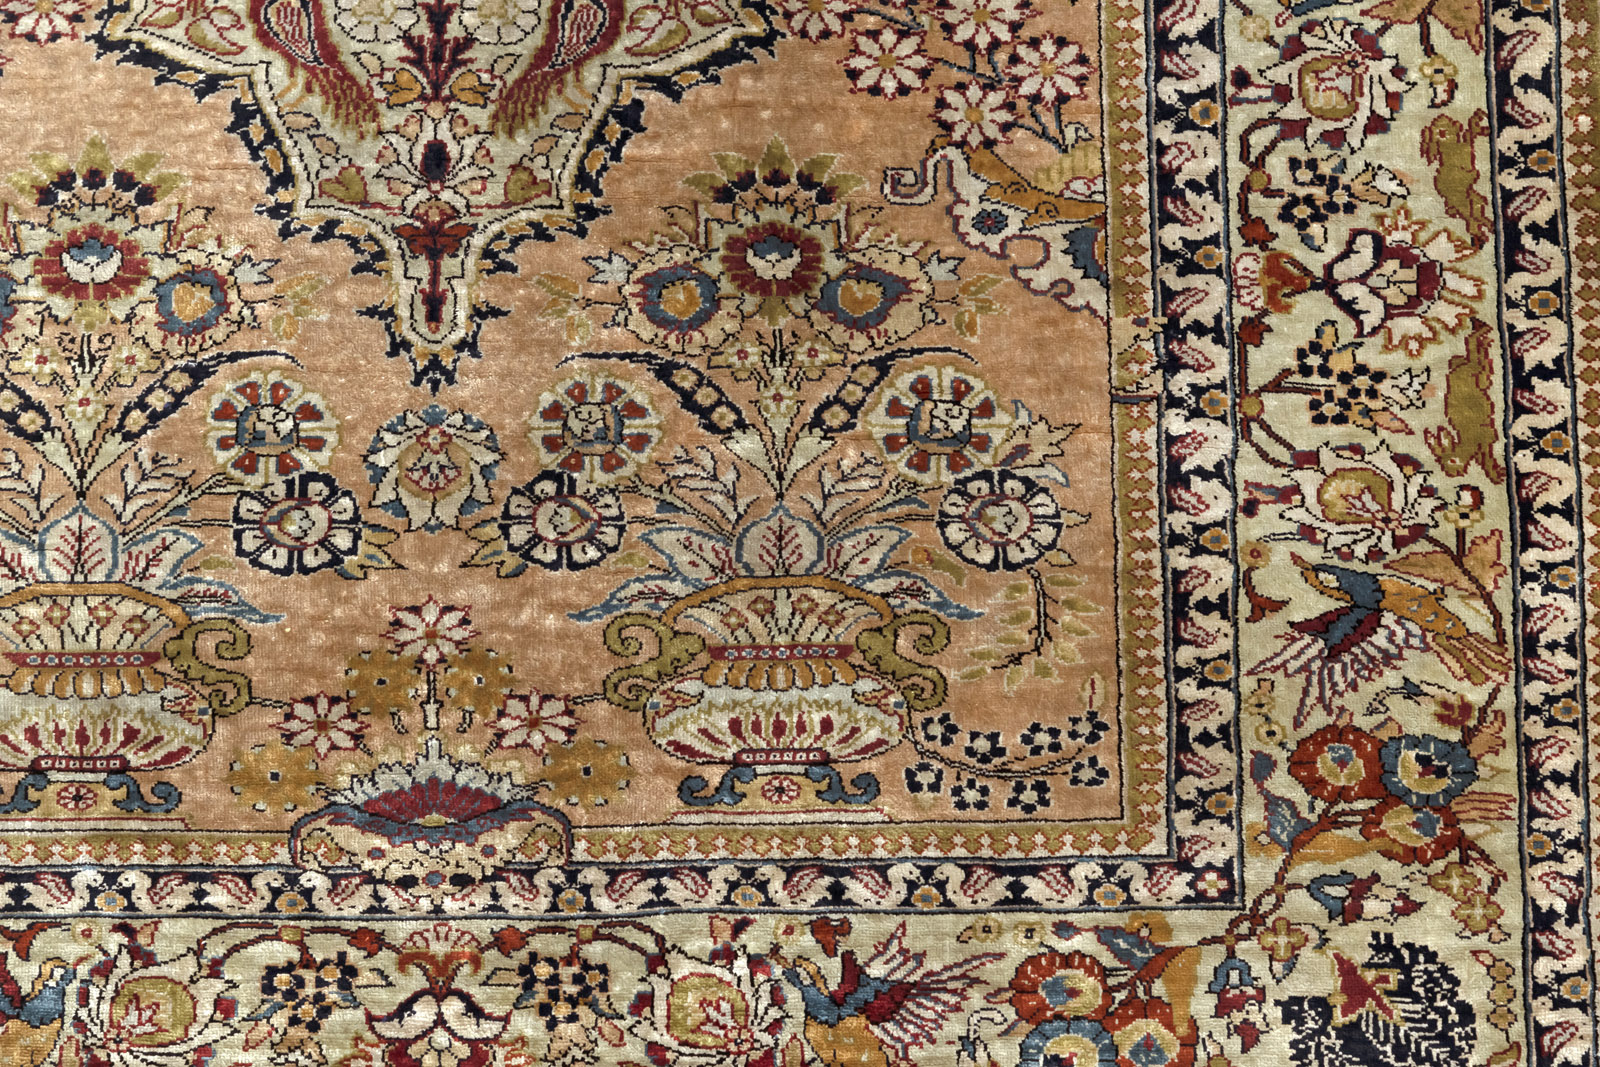 A FINE SMALL SILK RUG - Image 2 of 11